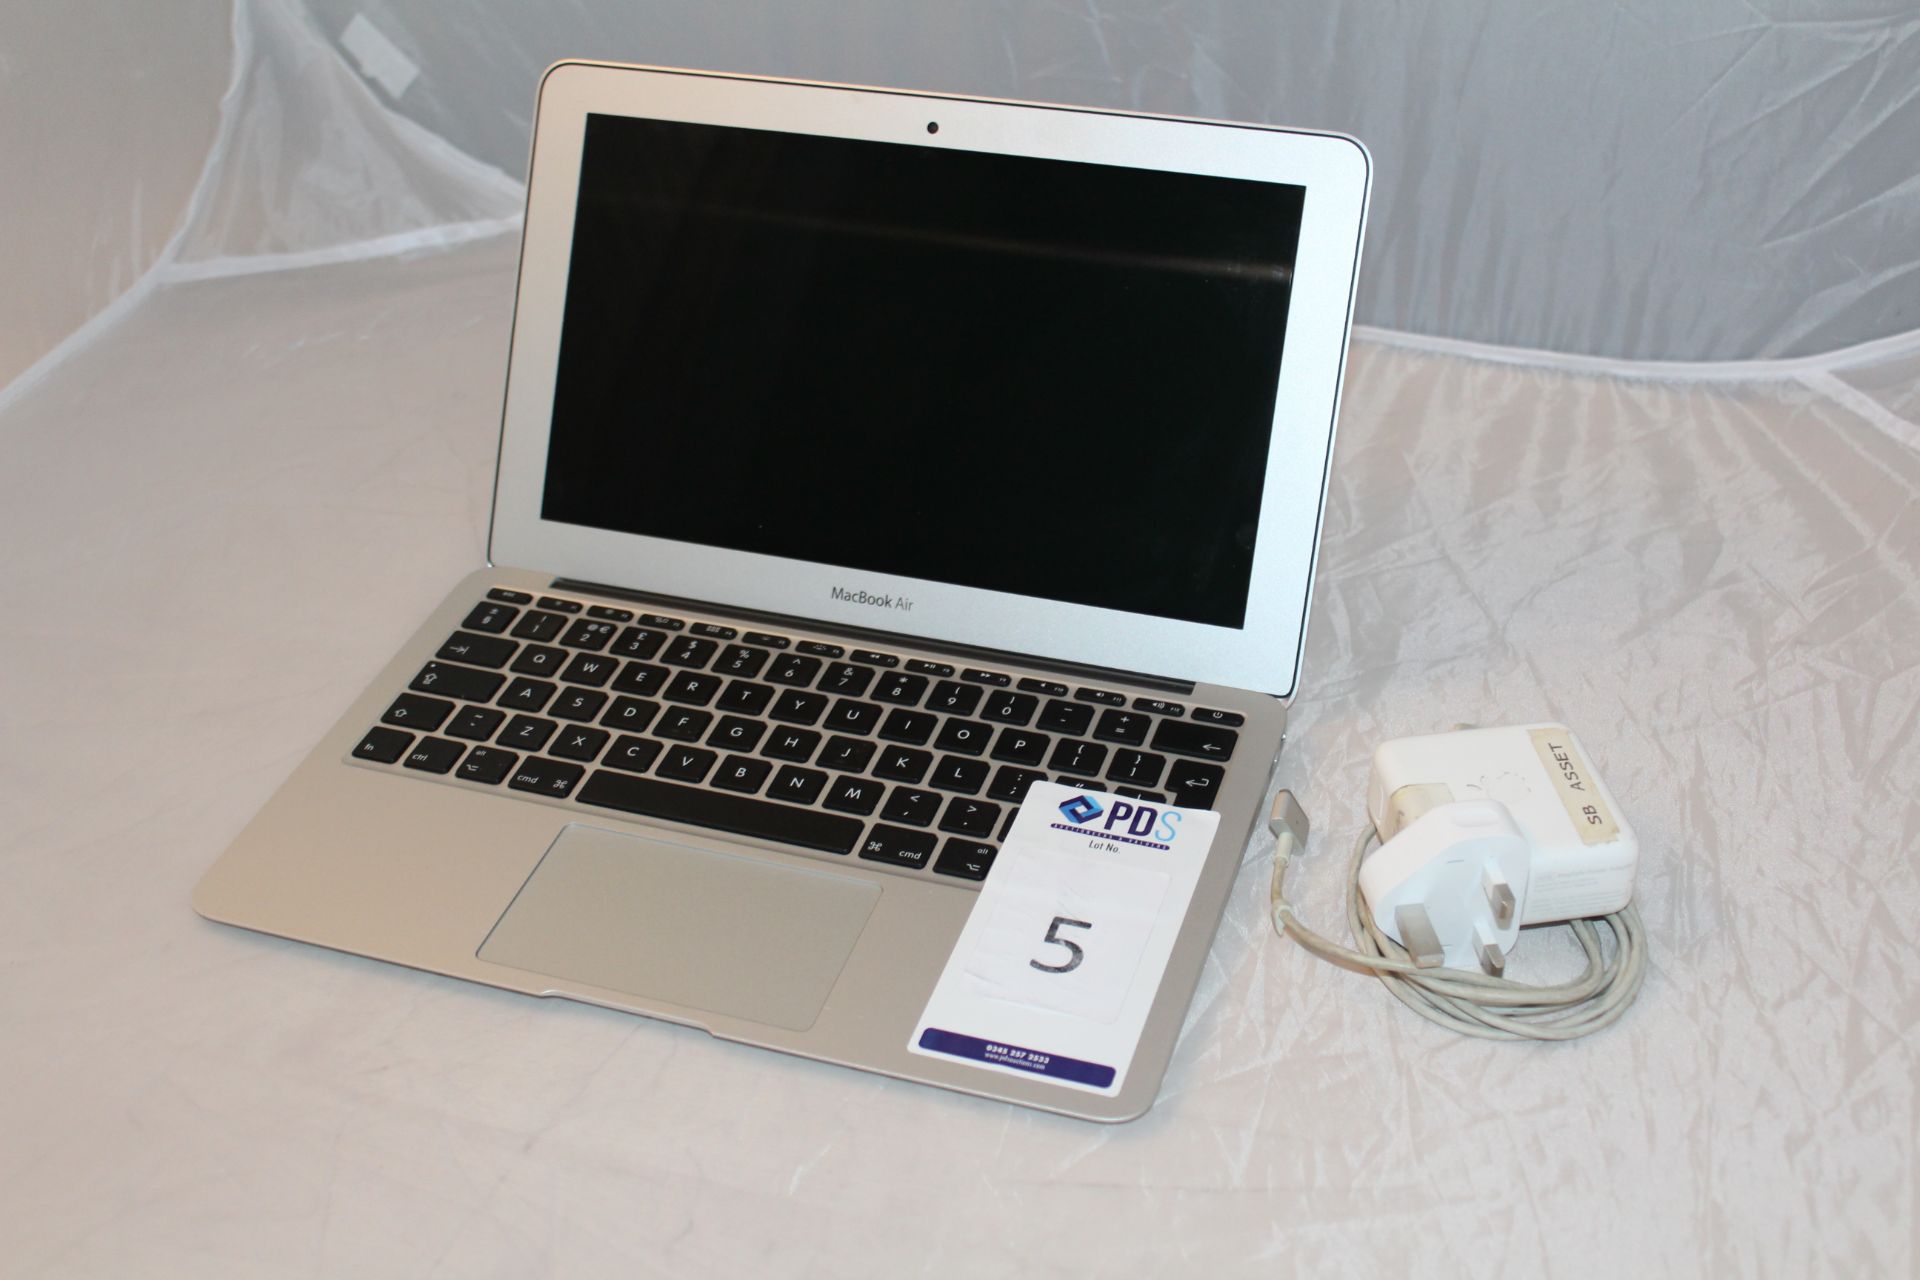 Apple MacBook Air A1465, Serial Number CO2JJ9DPDRV7 with Charger